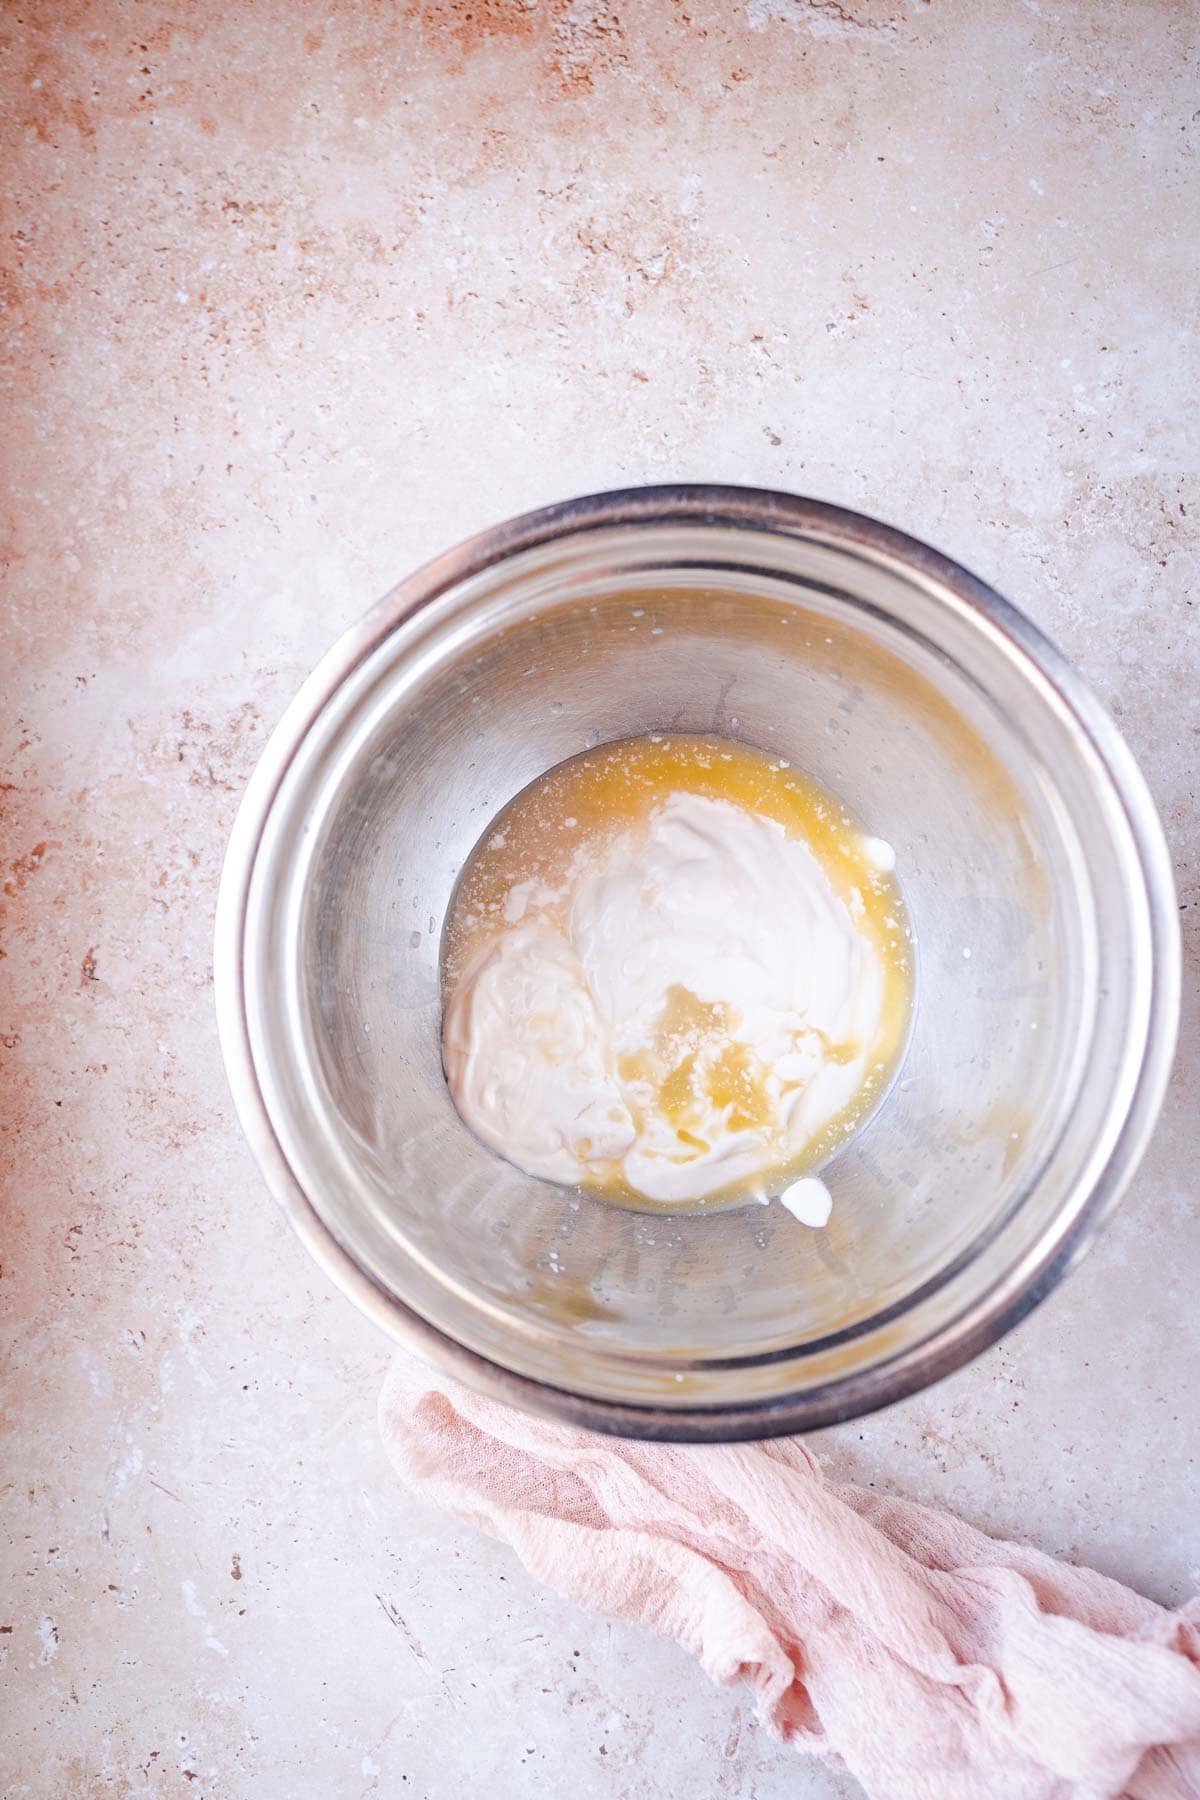 A silver mixing bowl filled with white and yellow liquid ingredients.